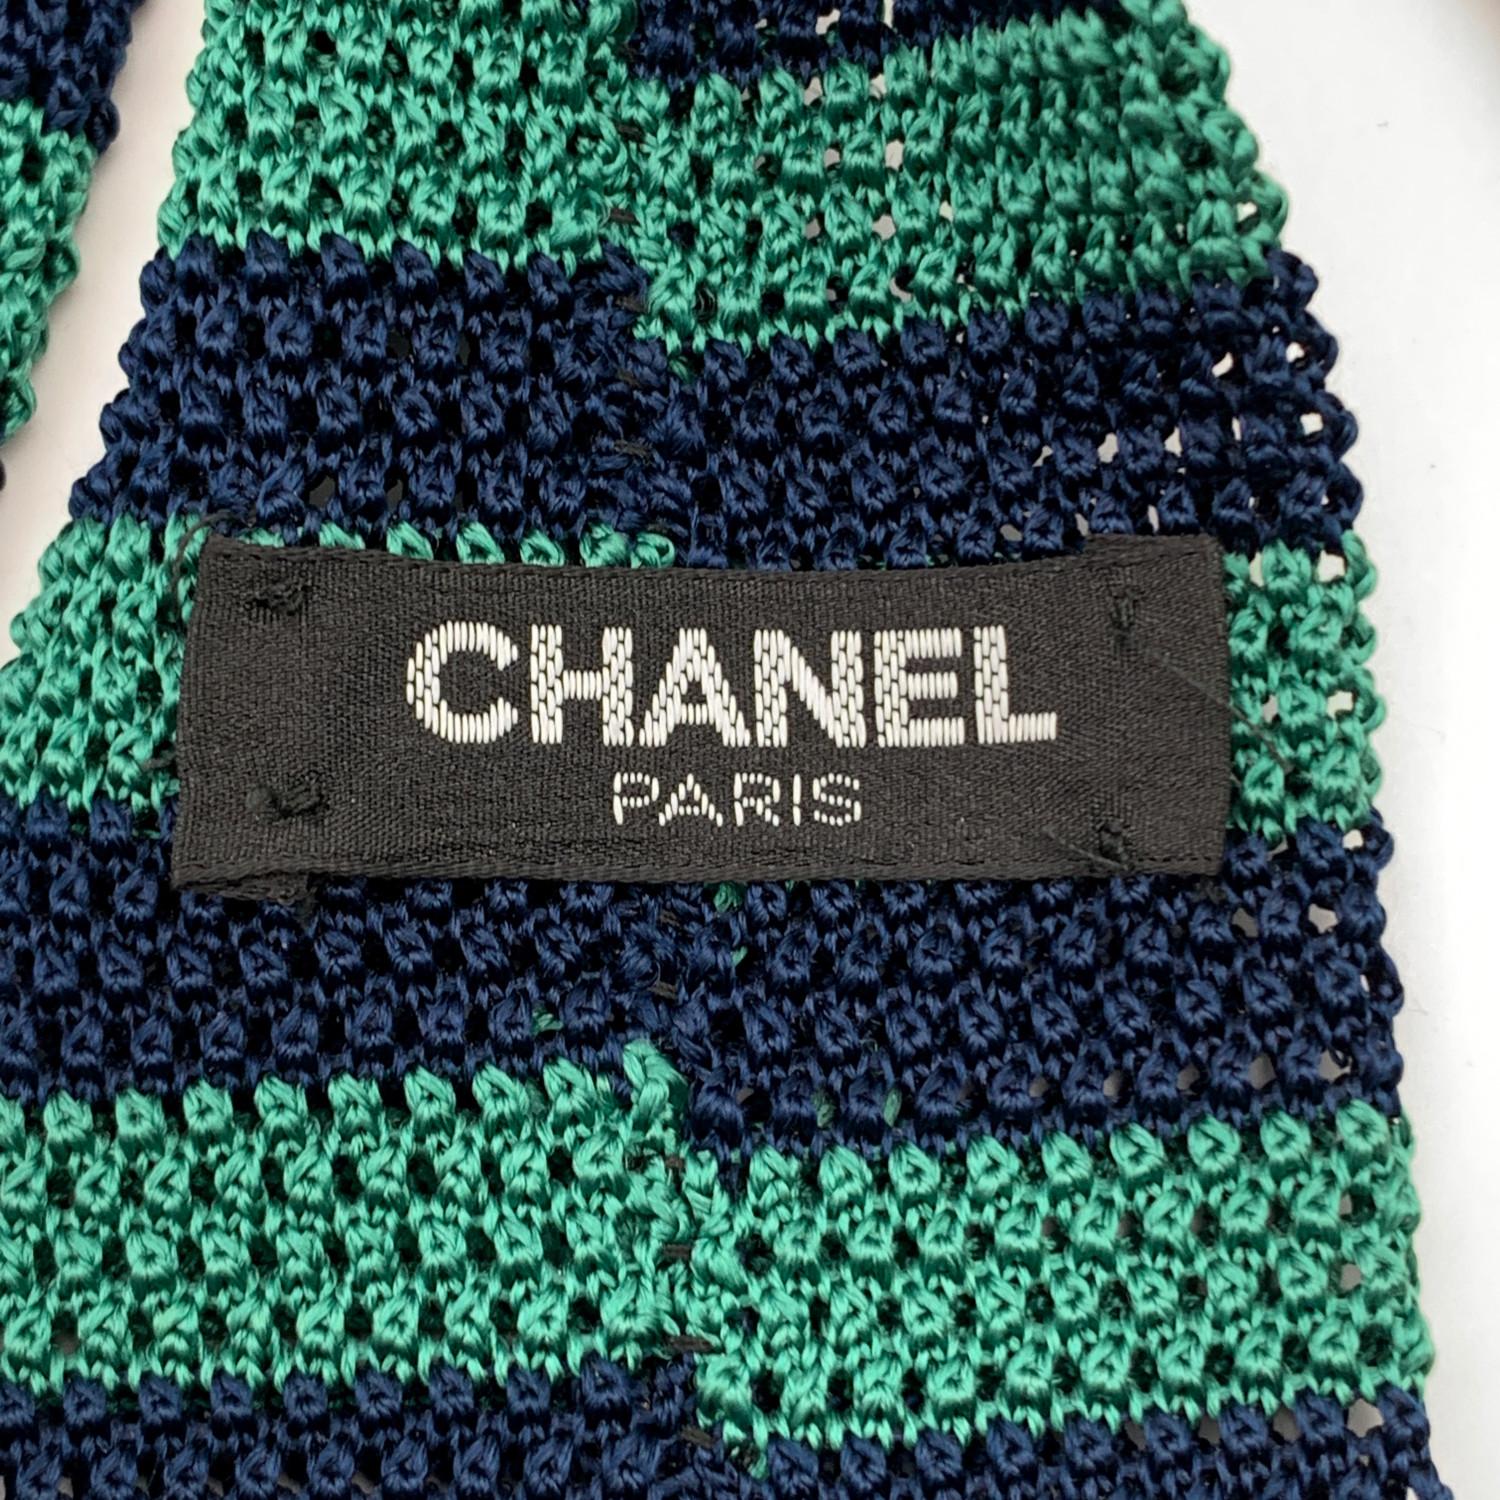 Chanel Beige and Black Striped Knit Silk Neck Tie with Chain Detail 2